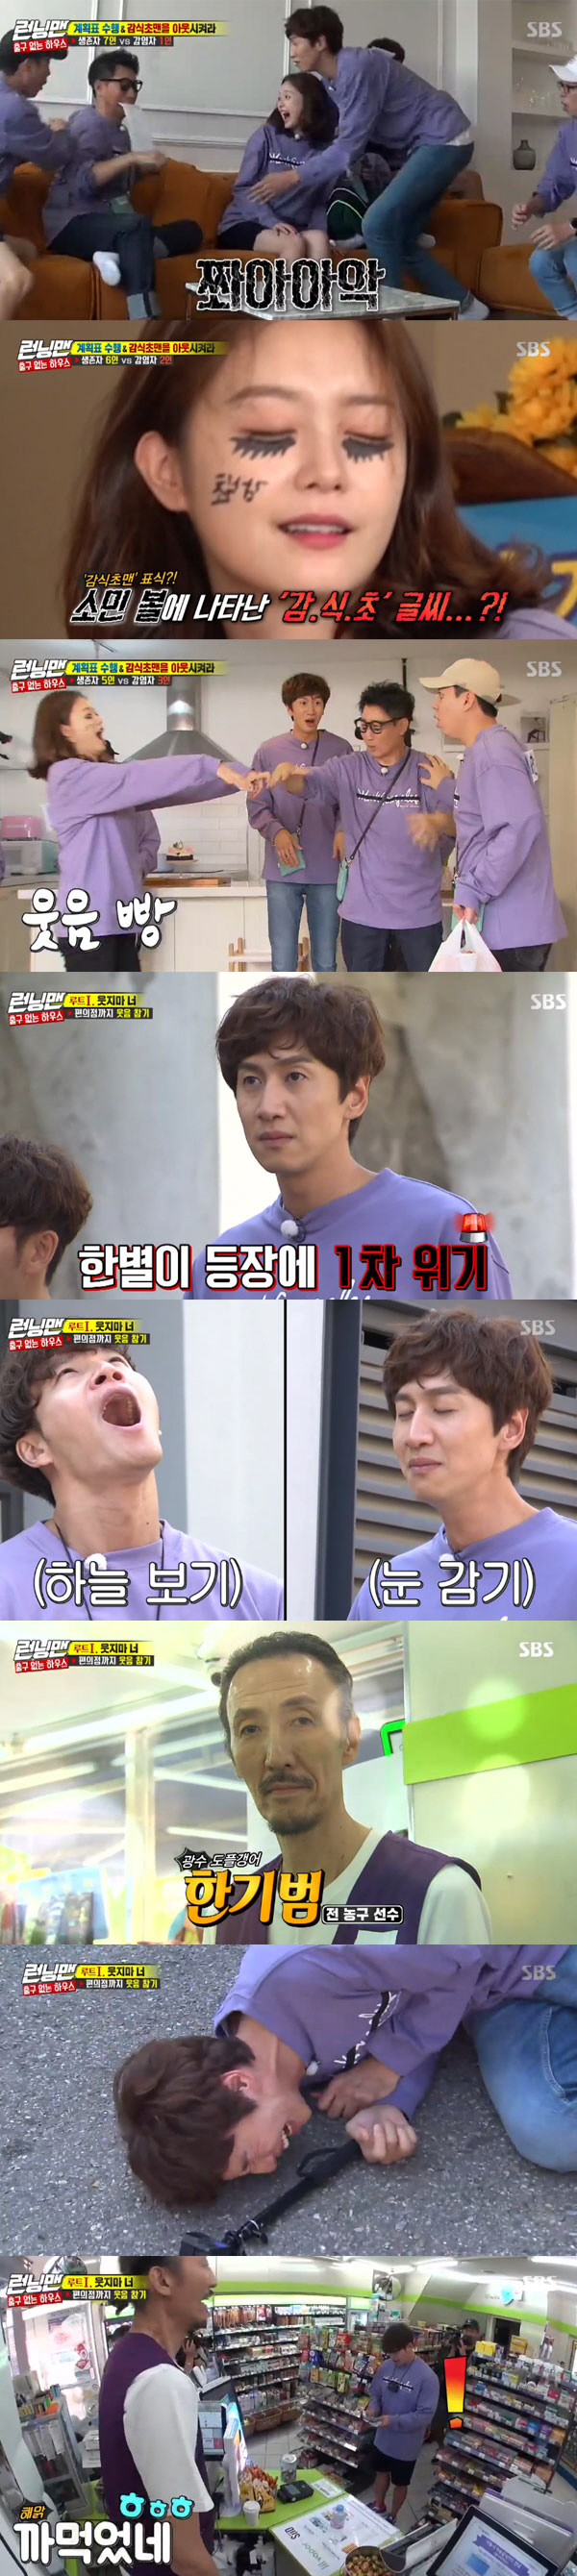 Running Man Yoo Jae-Suk was the persimmon vinegar manOn SBS Running Man broadcast on the 20th, members trapped in the escape house of question were Top Model in the high-level Do not laugh mission to escape the house.The production team asked me to write a life plan, saying, Today, I will shoot from 12:00 to 6:00 pm in the house.Members who entered the house wrote a life plan including lunch, indoor play, and snack.The cause of this is spreading rapidly, the news said. If you infect the persimmon vinegar, your emotions and appetite disappear and everything becomes initialized.The rules of the day are to perform all the planners within six hours and the persimmon vinegarman out, and the uninfected will win.On the contrary, if the power persimmon vinegar is infected, if the plan is not performed within the time limit, the persimmon vinegar man will win and two of the infectors will perform penalties.There are also four mission routes outside the house, and if the schedule is not possible in the house, one route can be Choicesed to perform the mission.However, it is infected in failure in the persimmon vinegar bacteria.First, Ji Suk-jin stepped out of the house to acquire food, and top model on the high-level Dont Laugh mission.Ji Suk-jin started out, saying, It will be easier than I thought, but it collapsed helplessly in the unexpected past-class laughter tolerance mission.Ji Suk-jin, who returned home with Infection in persimmon vinegar, opened the name tag of Jeon So-min with his mouth and infected it with persimmon vinegar.Kim Jong-kook and Lee Kwang-soo top Model on Dont Laugh mission as Yang Se-chan also failed to get the commission.Kim Jong-kook, the strongest player in the tolerance mission, was unable to tolerate laughter to the staffs of the scene because he was suffering from the blood on his neck, unlike the expectation of the members who would easily succeed.Difficultly, it succeeded to stage four, but Lee Kwang-soo eventually became K.O. on the appearance of Chitki Han Ki-bum; while Kim Jong-kook succeeded, and acquired human hints.Yoo Jae-Suk then stepped out of the house to buy a snack.Its a success if Yoo Jae-Suk and Haha he points out are not photographed with Name tag and face to Top Model and paparazzi on the If you get shot, you die mission.With Yoo Jae-Suk and Haha successful in the commission, Ji Suk-jin succeeded in ripping Lee Kwang-soos Name tag at that moment.The human Kim Jong-kook Choices was Yoo Jae-Suk while Song Ji-hyo was infected with persimmon vinegar.The persimmon vinegar man that was released afterwards was Yoo Jae-Suk.The victory of the human team confirmed the rest of the penalty, except for two people pointed out by Haha and Kim Jong-kook.